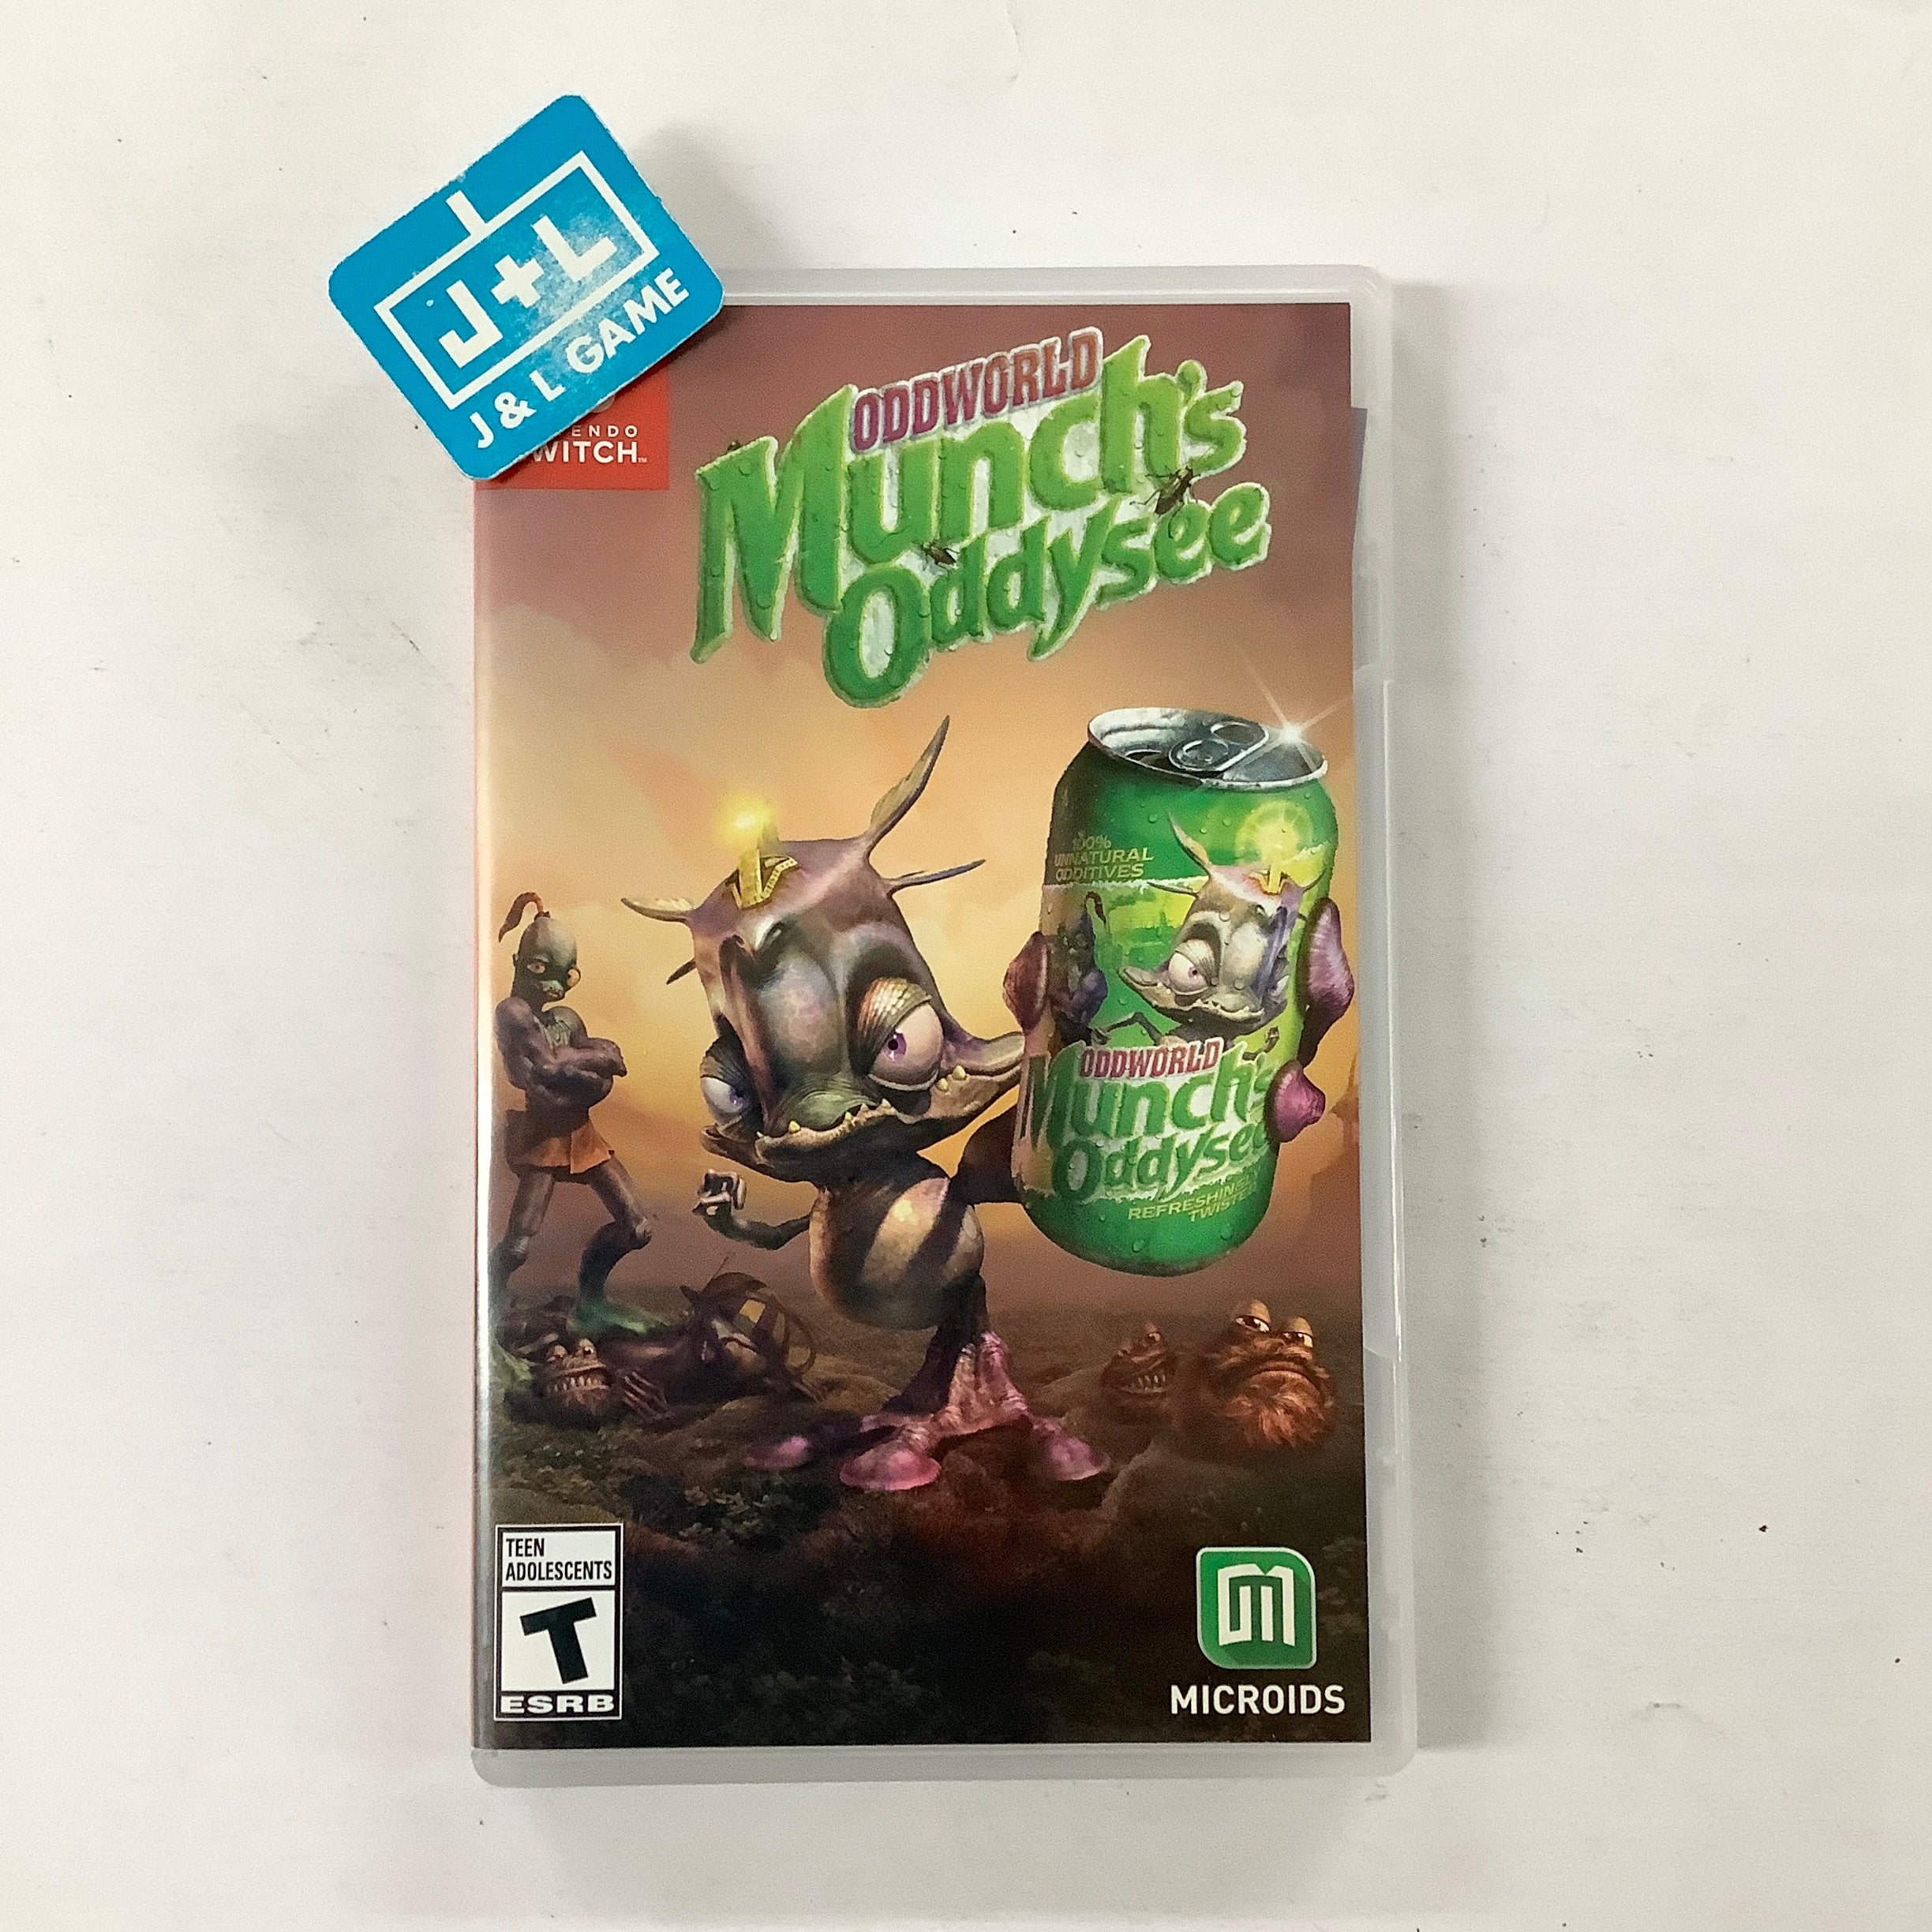 Oddworld: Munch's Oddysee - (NSW) Nintendo Switch [UNBOXING] Video Games Maximum Games   